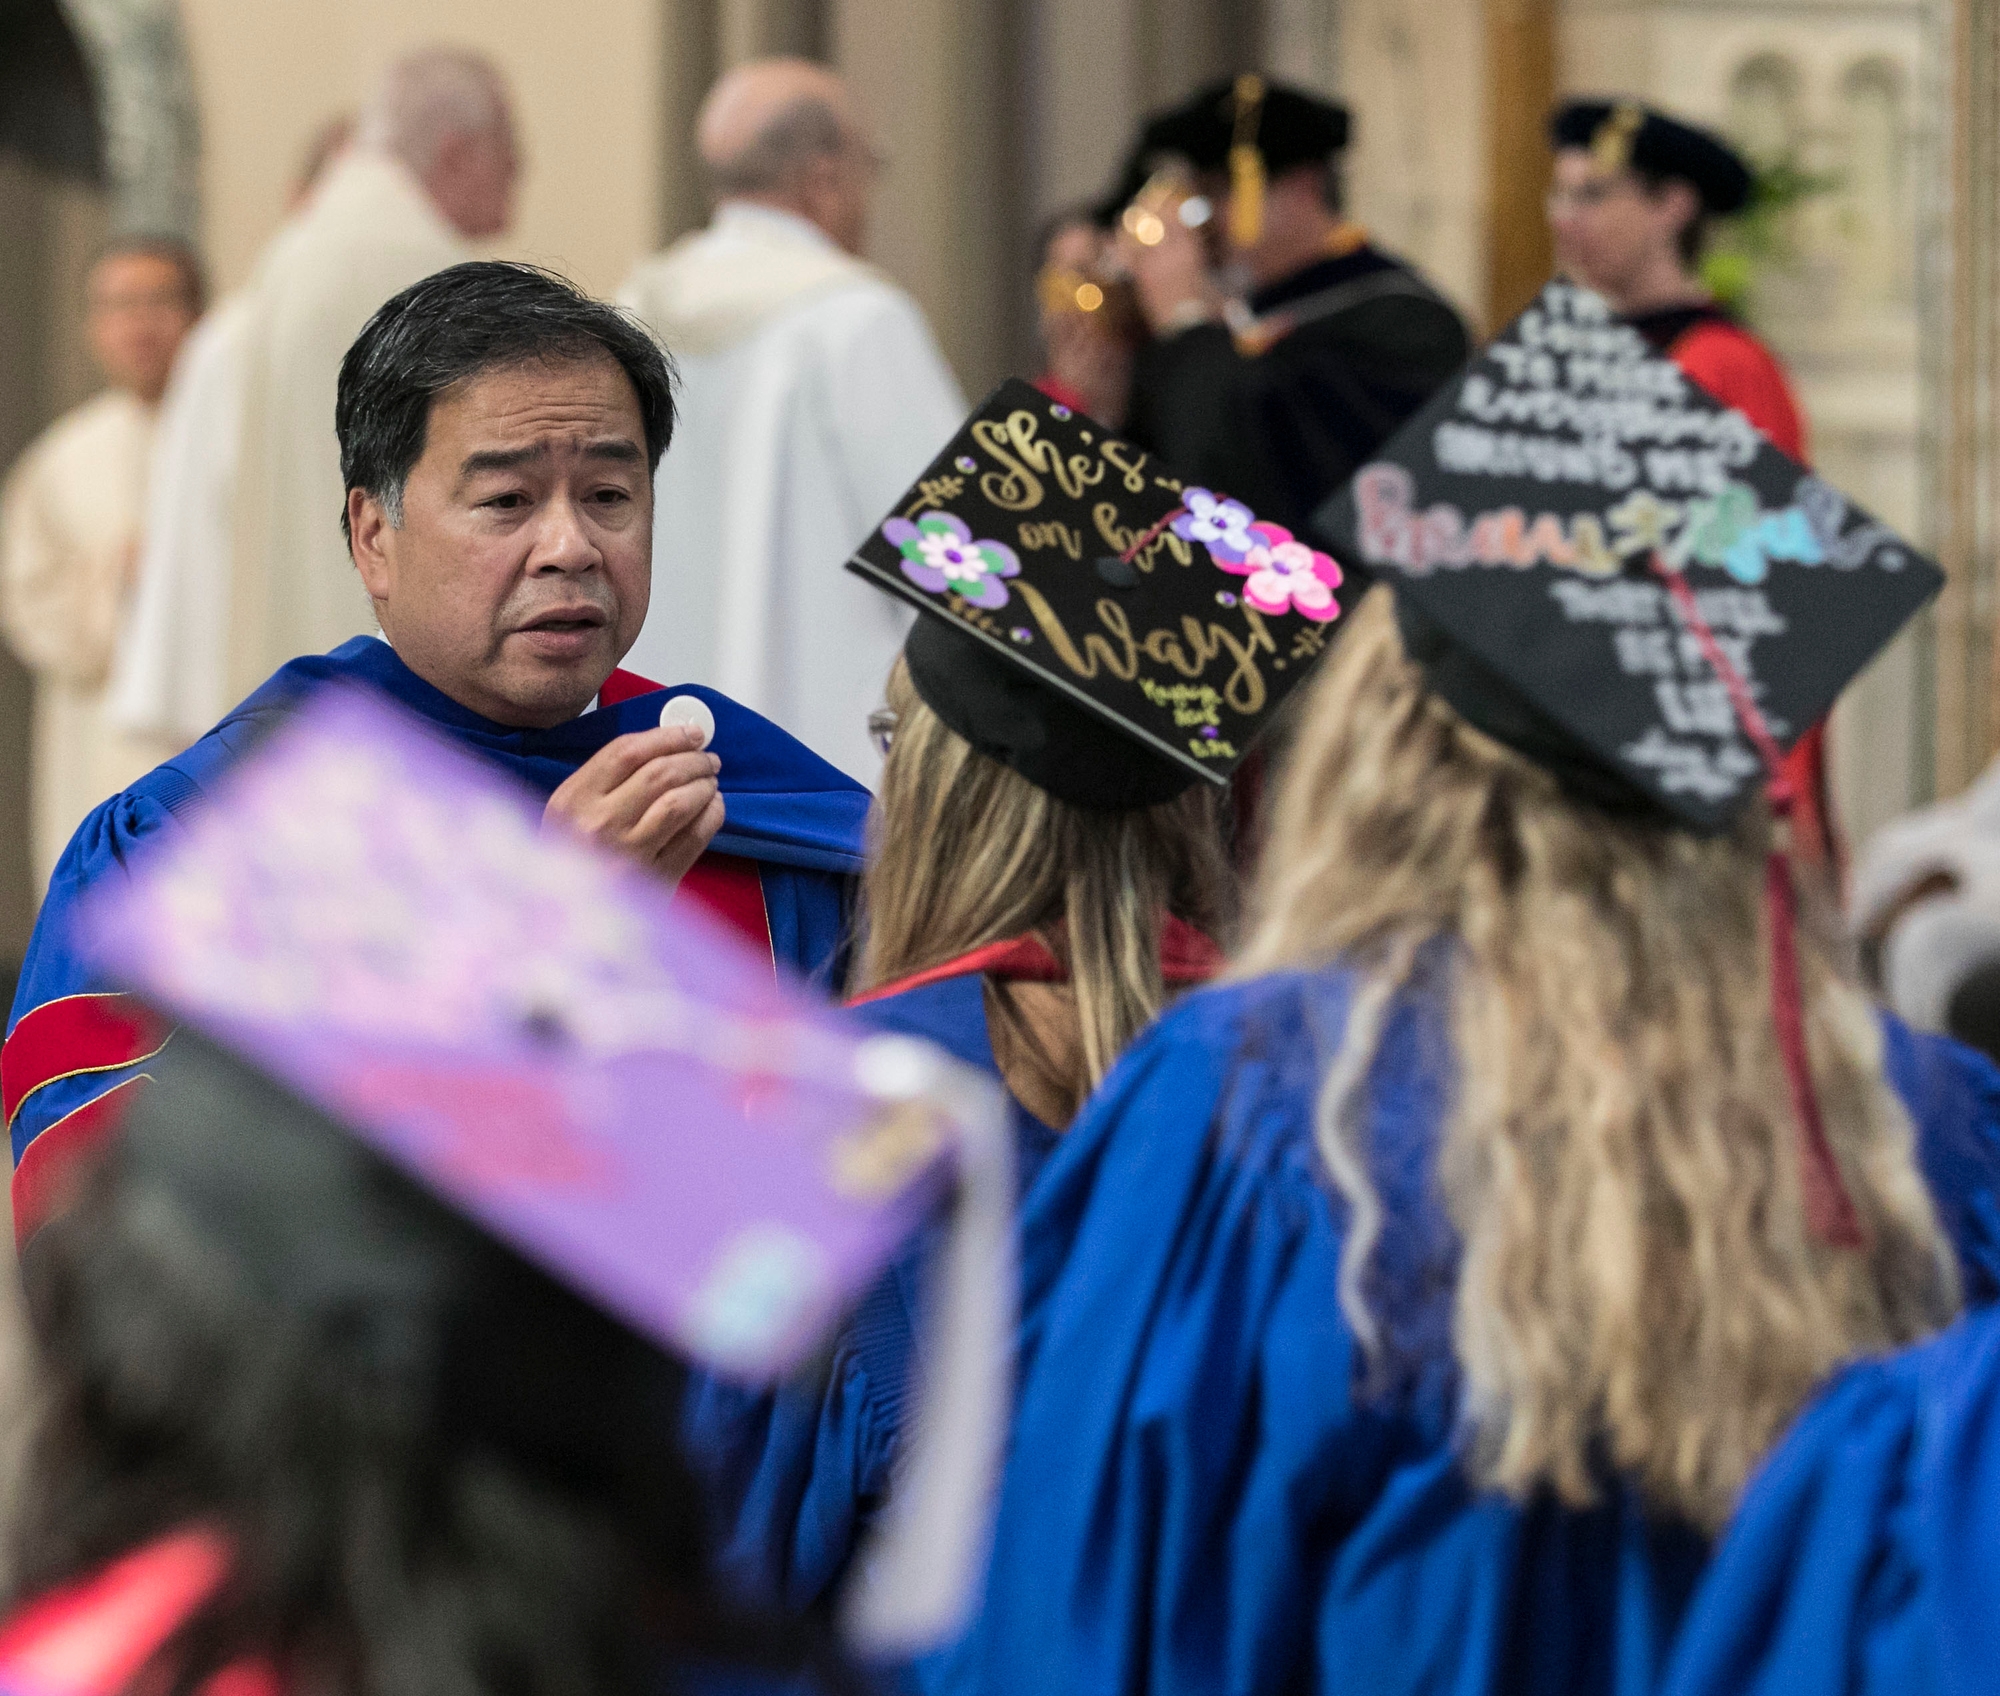 A. Gabriel Esteban, Ph.D., president of DePaul University, serves as a eucharistic minister distributing Holy Communion during the annual Baccalaureate Mass. (DePaul University/Jamie Moncrief)